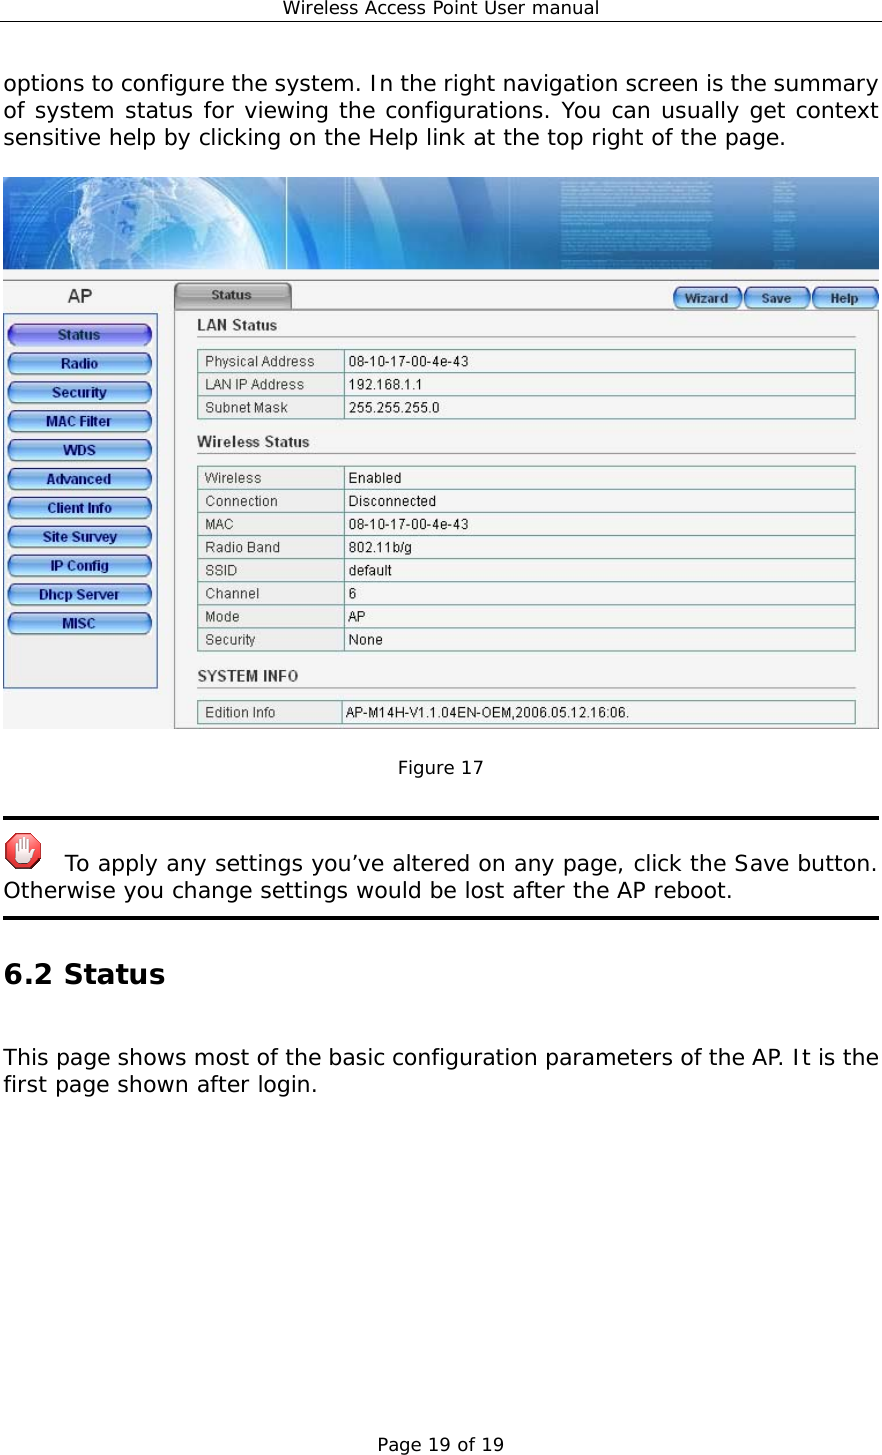 Wireless Access Point User manual Page 19 of 19 options to configure the system. In the right navigation screen is the summary of system status for viewing the configurations. You can usually get context sensitive help by clicking on the Help link at the top right of the page.    Figure 17     To apply any settings you’ve altered on any page, click the Save button. Otherwise you change settings would be lost after the AP reboot.  6.2 Status  This page shows most of the basic configuration parameters of the AP. It is the first page shown after login.  